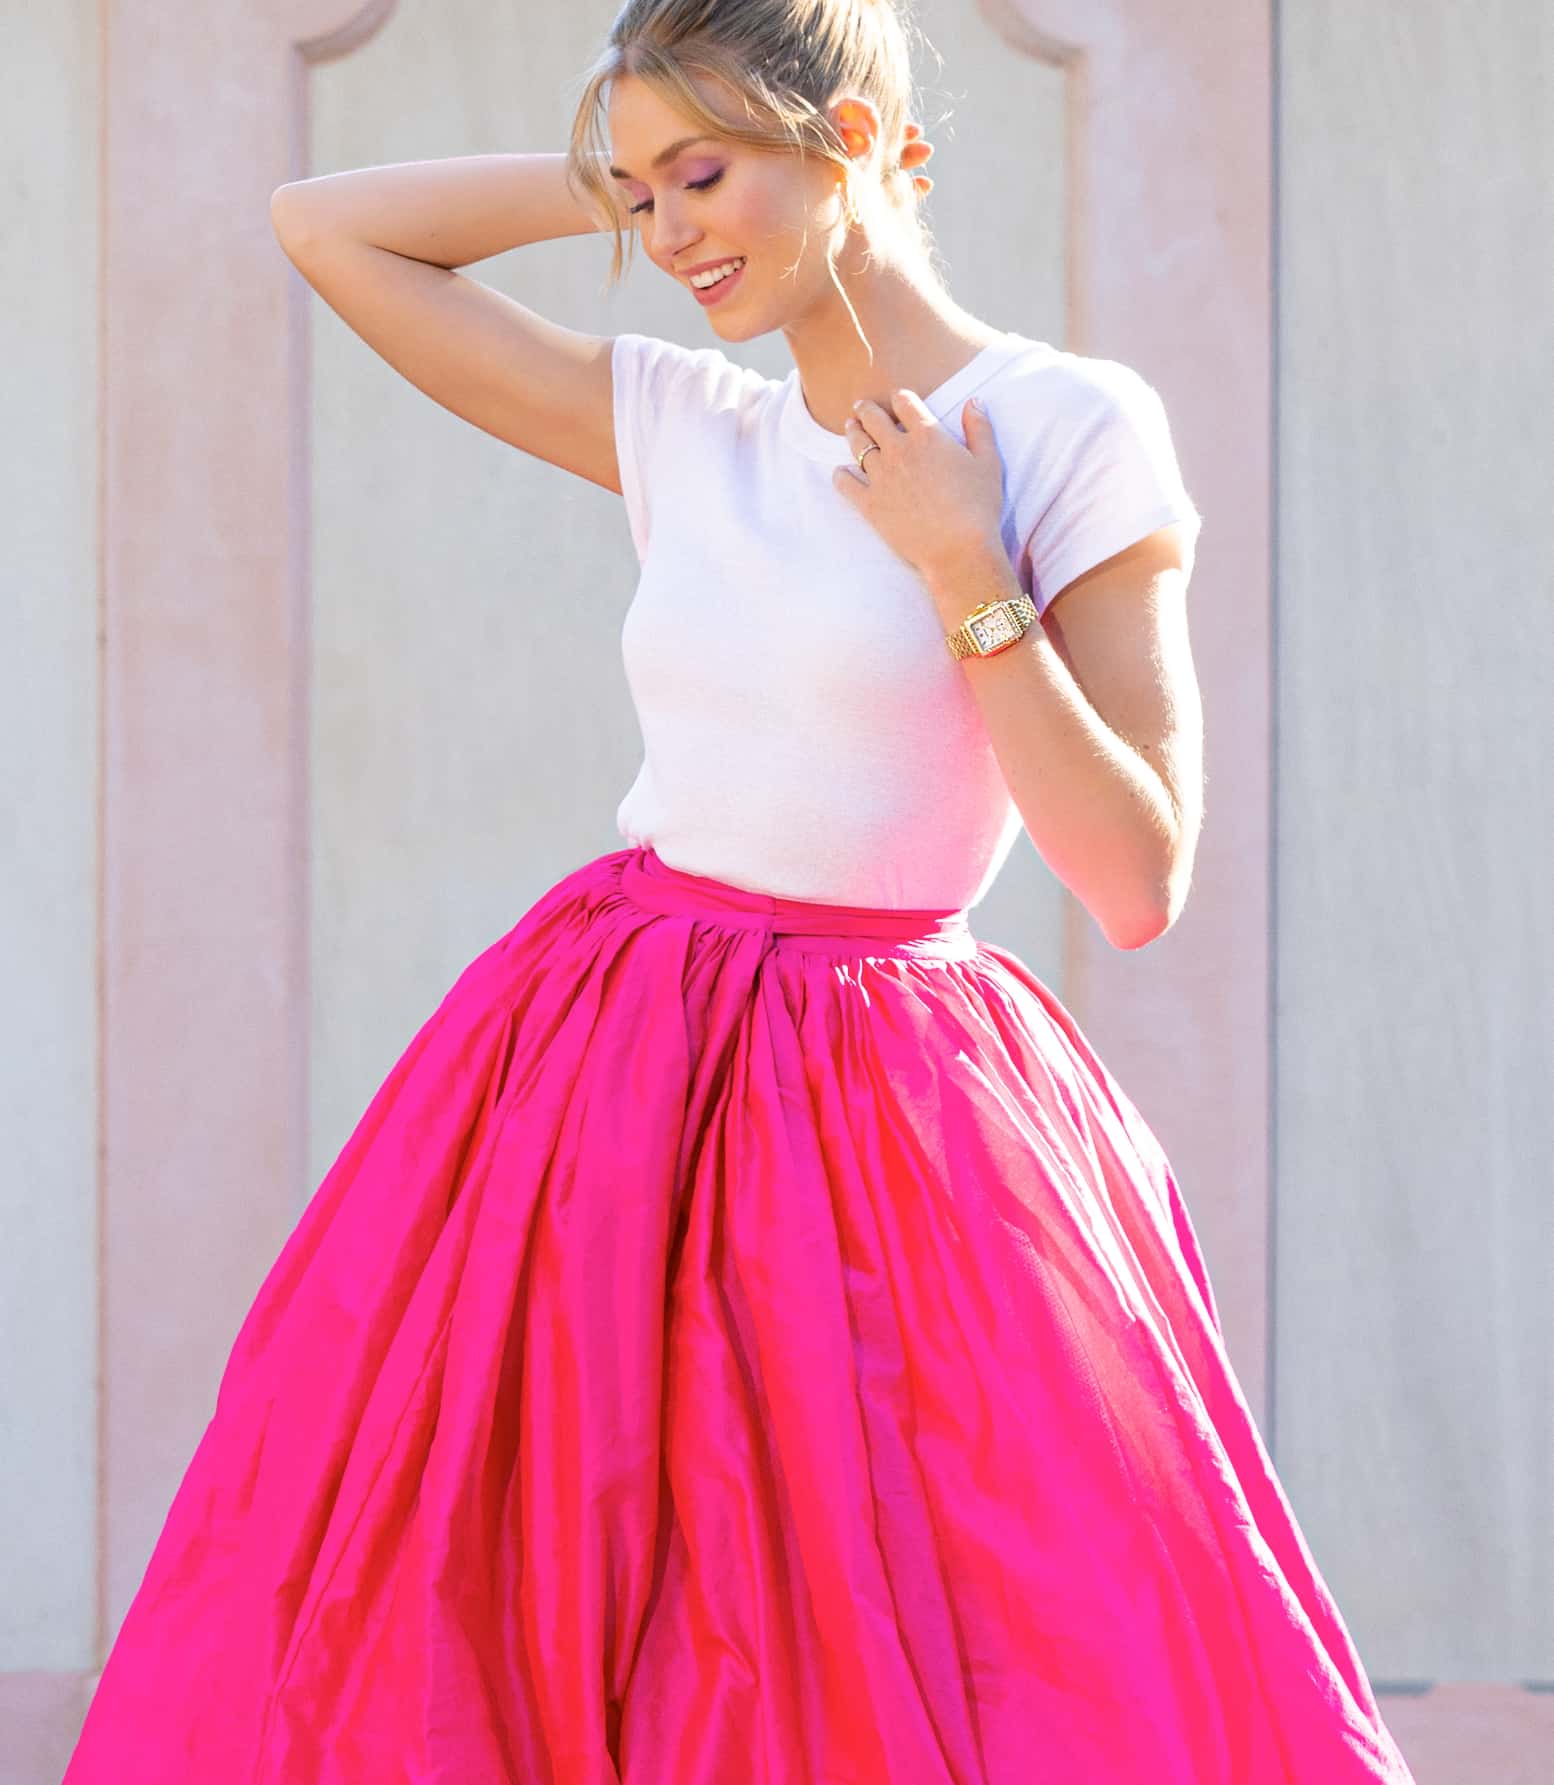 Woman in white tee and pink skirt wearing a MICHELE watch